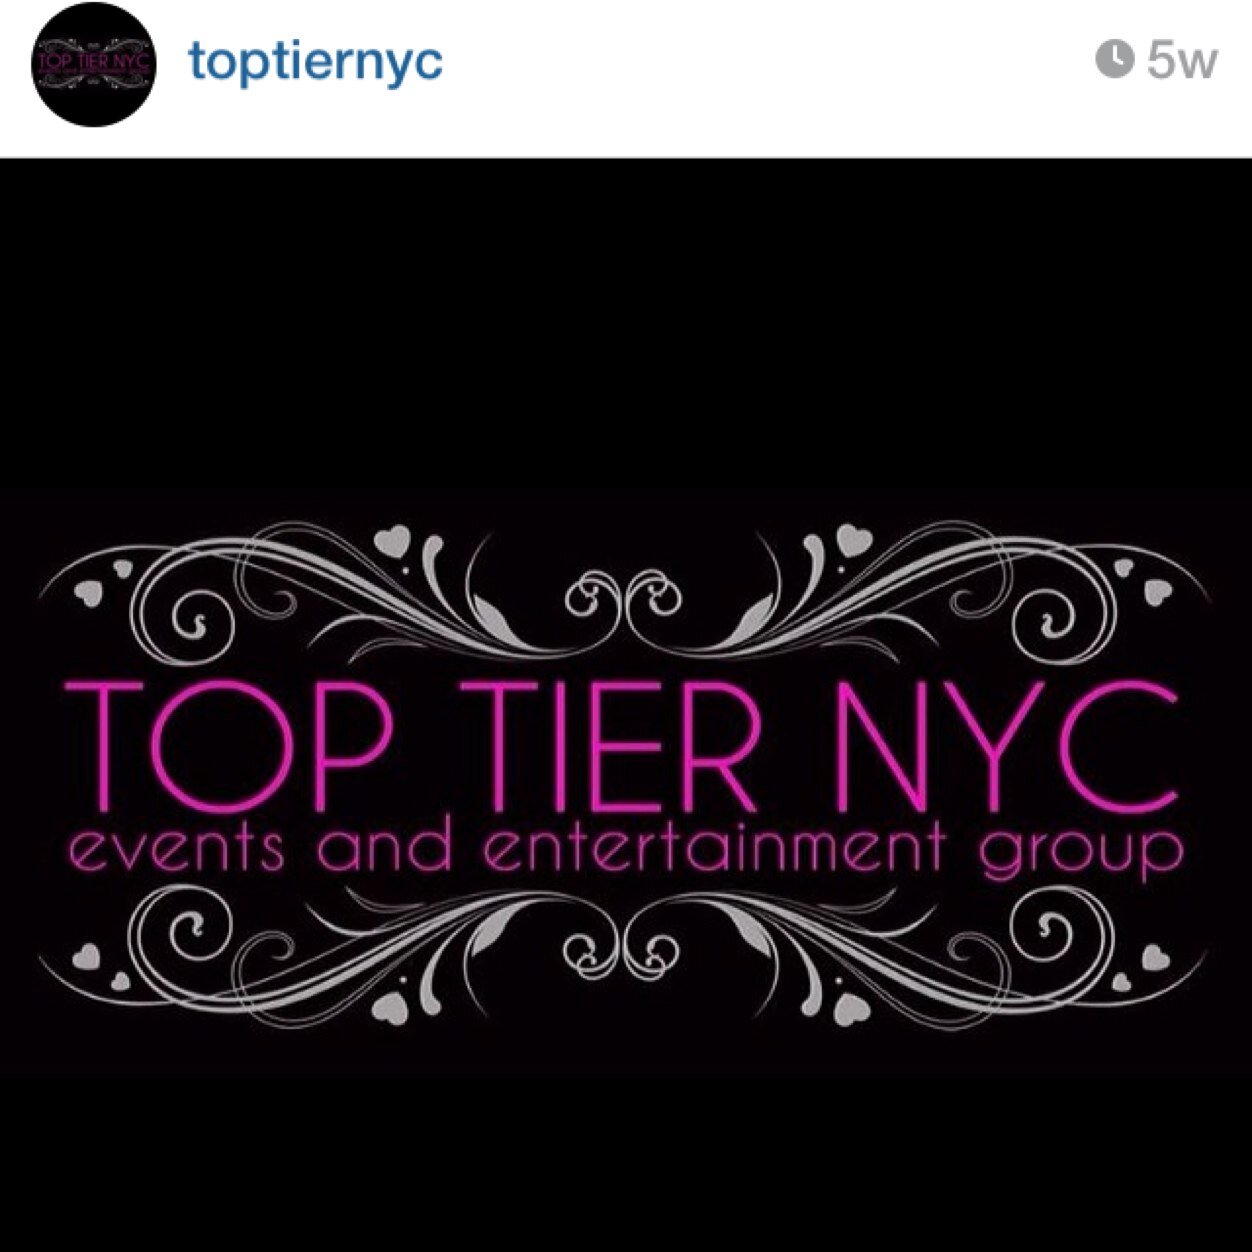 Top Tier NYC does birthday parties,events,restaurants, @ the best venues in NYC. Av,Lavo,Tao,1Oak,VIP Room, CaTch etc..